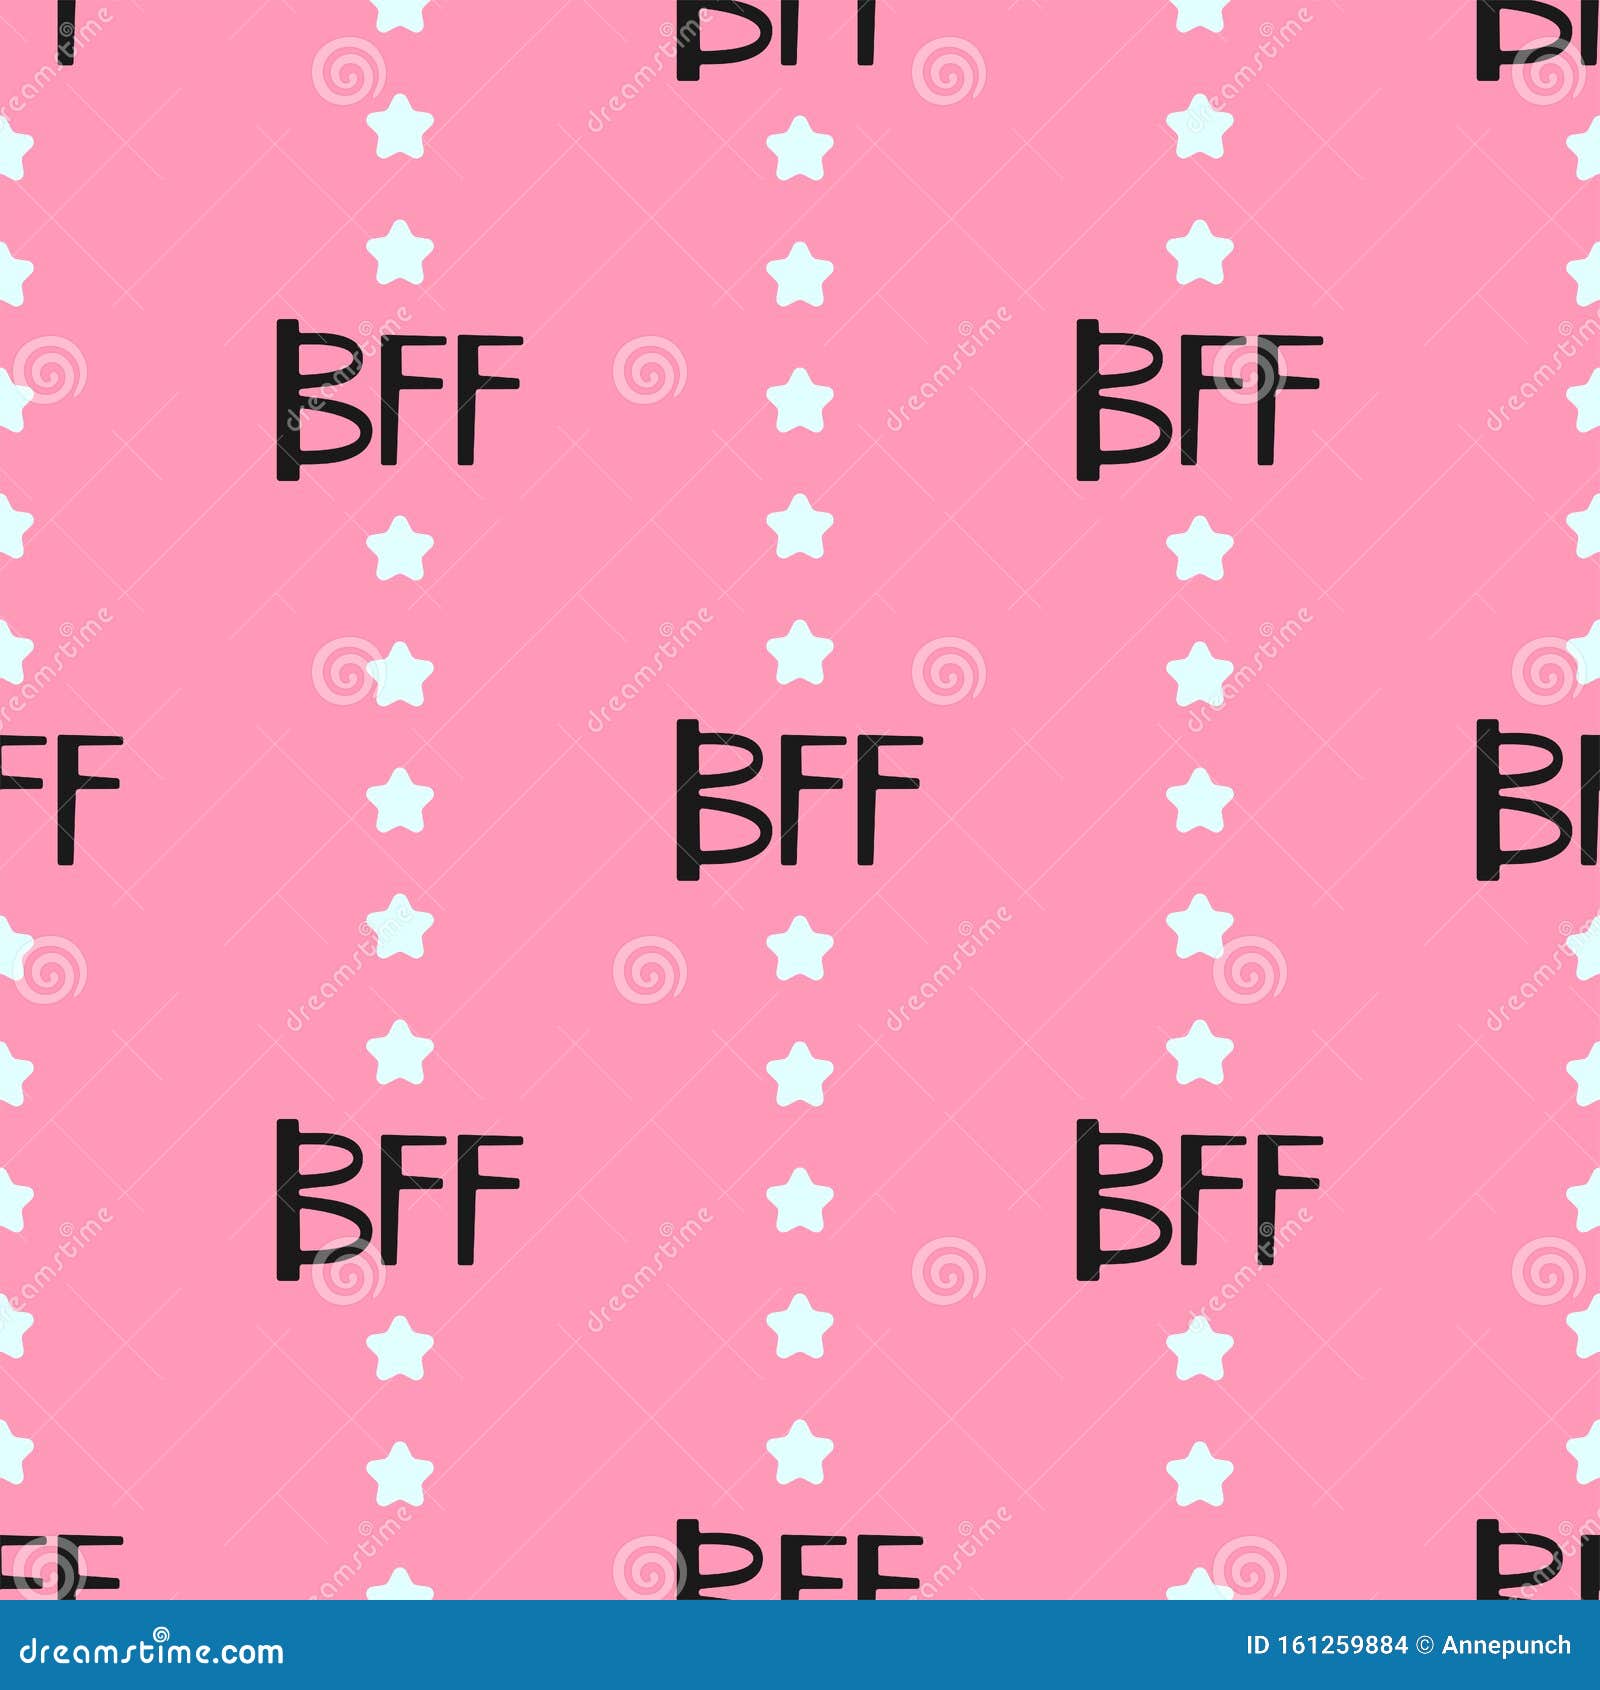 cute seamless pattern. repeated abbreviations bff and stars.